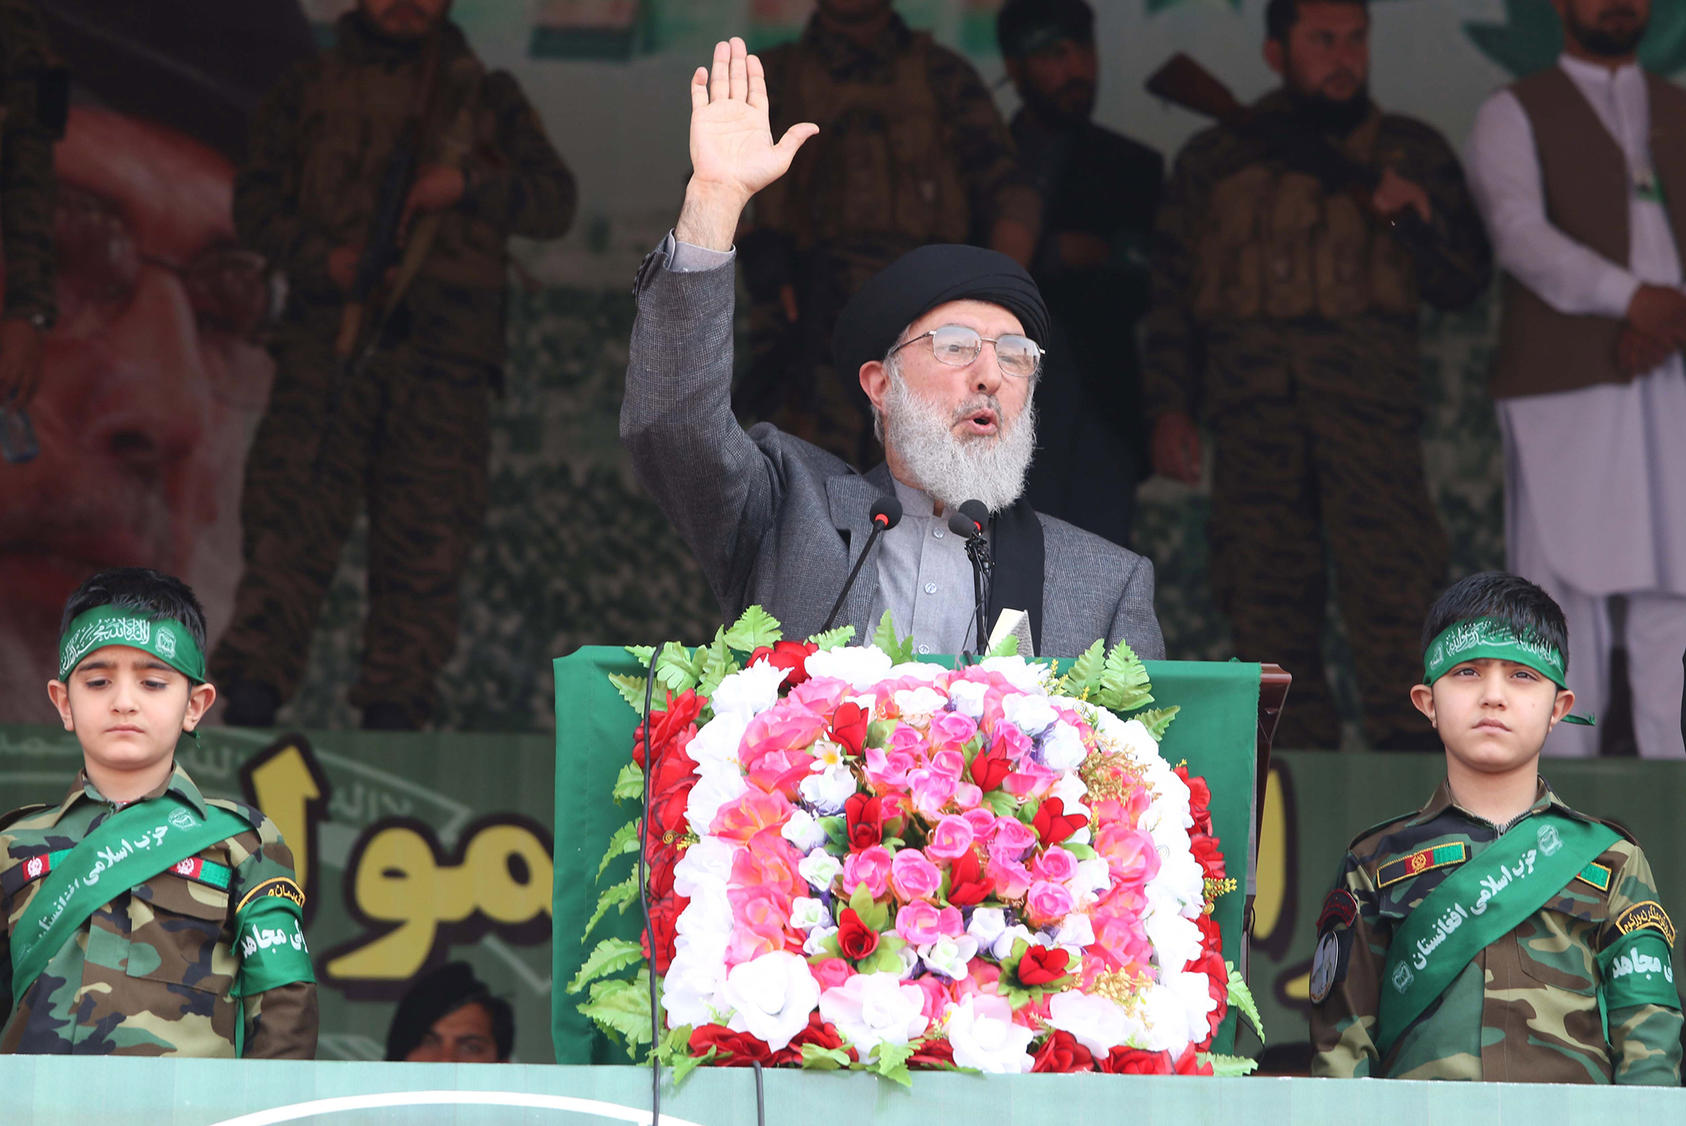 Gulbuddin Hekmatyar addresses supporters in Jalalabad, Afghanistan, in March 2018. (Photo by Ghulamullah Habibi/ EPA-EFE/ Shutterstock)